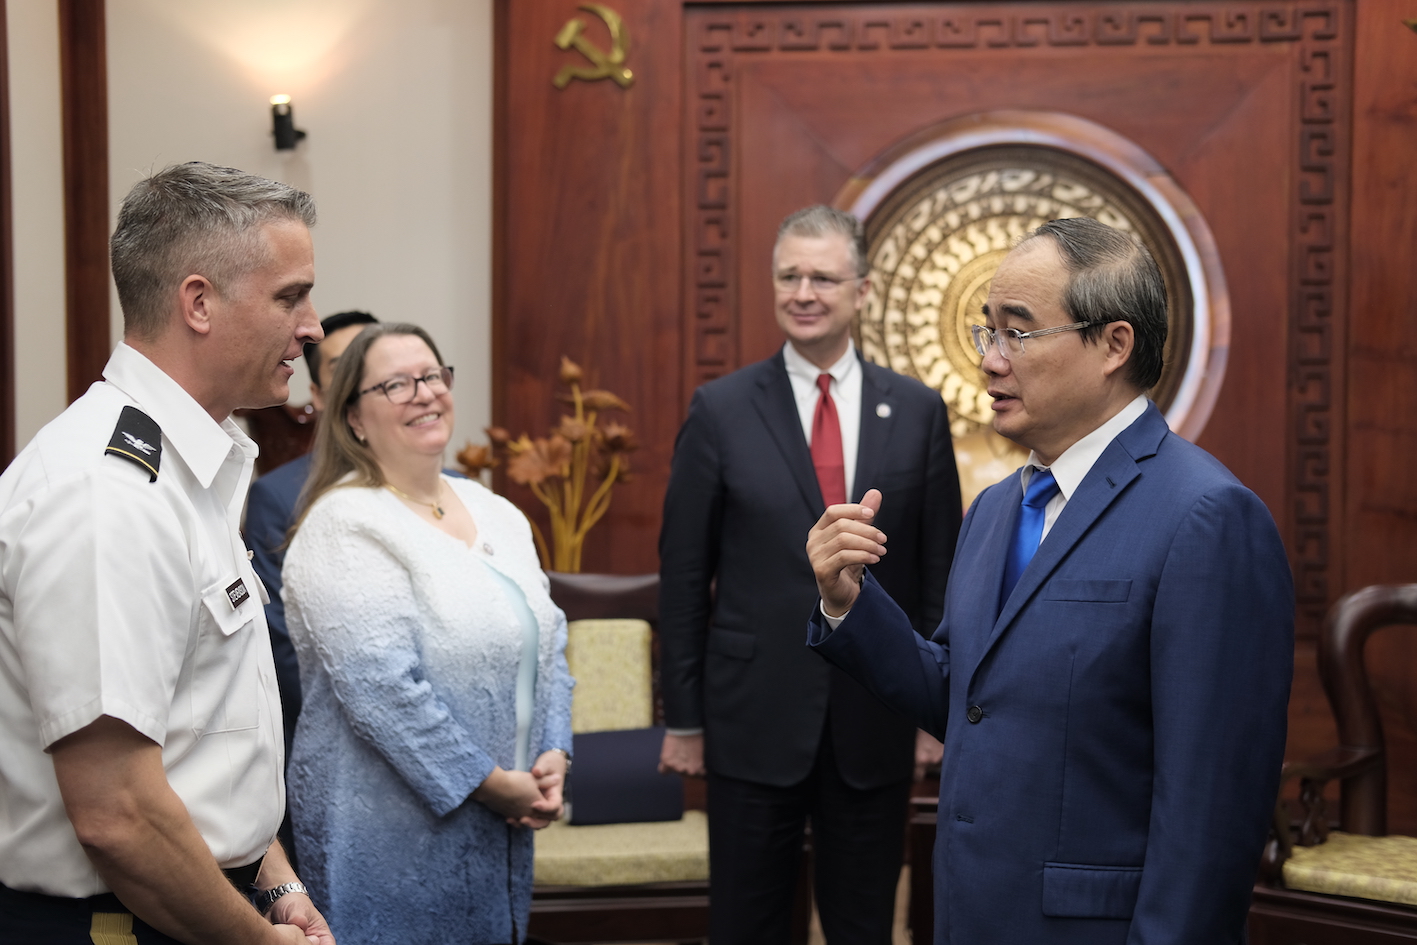 Ho Chi Minh City Party Secretary Nguyen Thien Nhan (right) receives the U.S. diplomatic mission at his office in Ho Chi Minh City, June 23, 2020. Photo: Tran Phuong / Tuoi Tre News